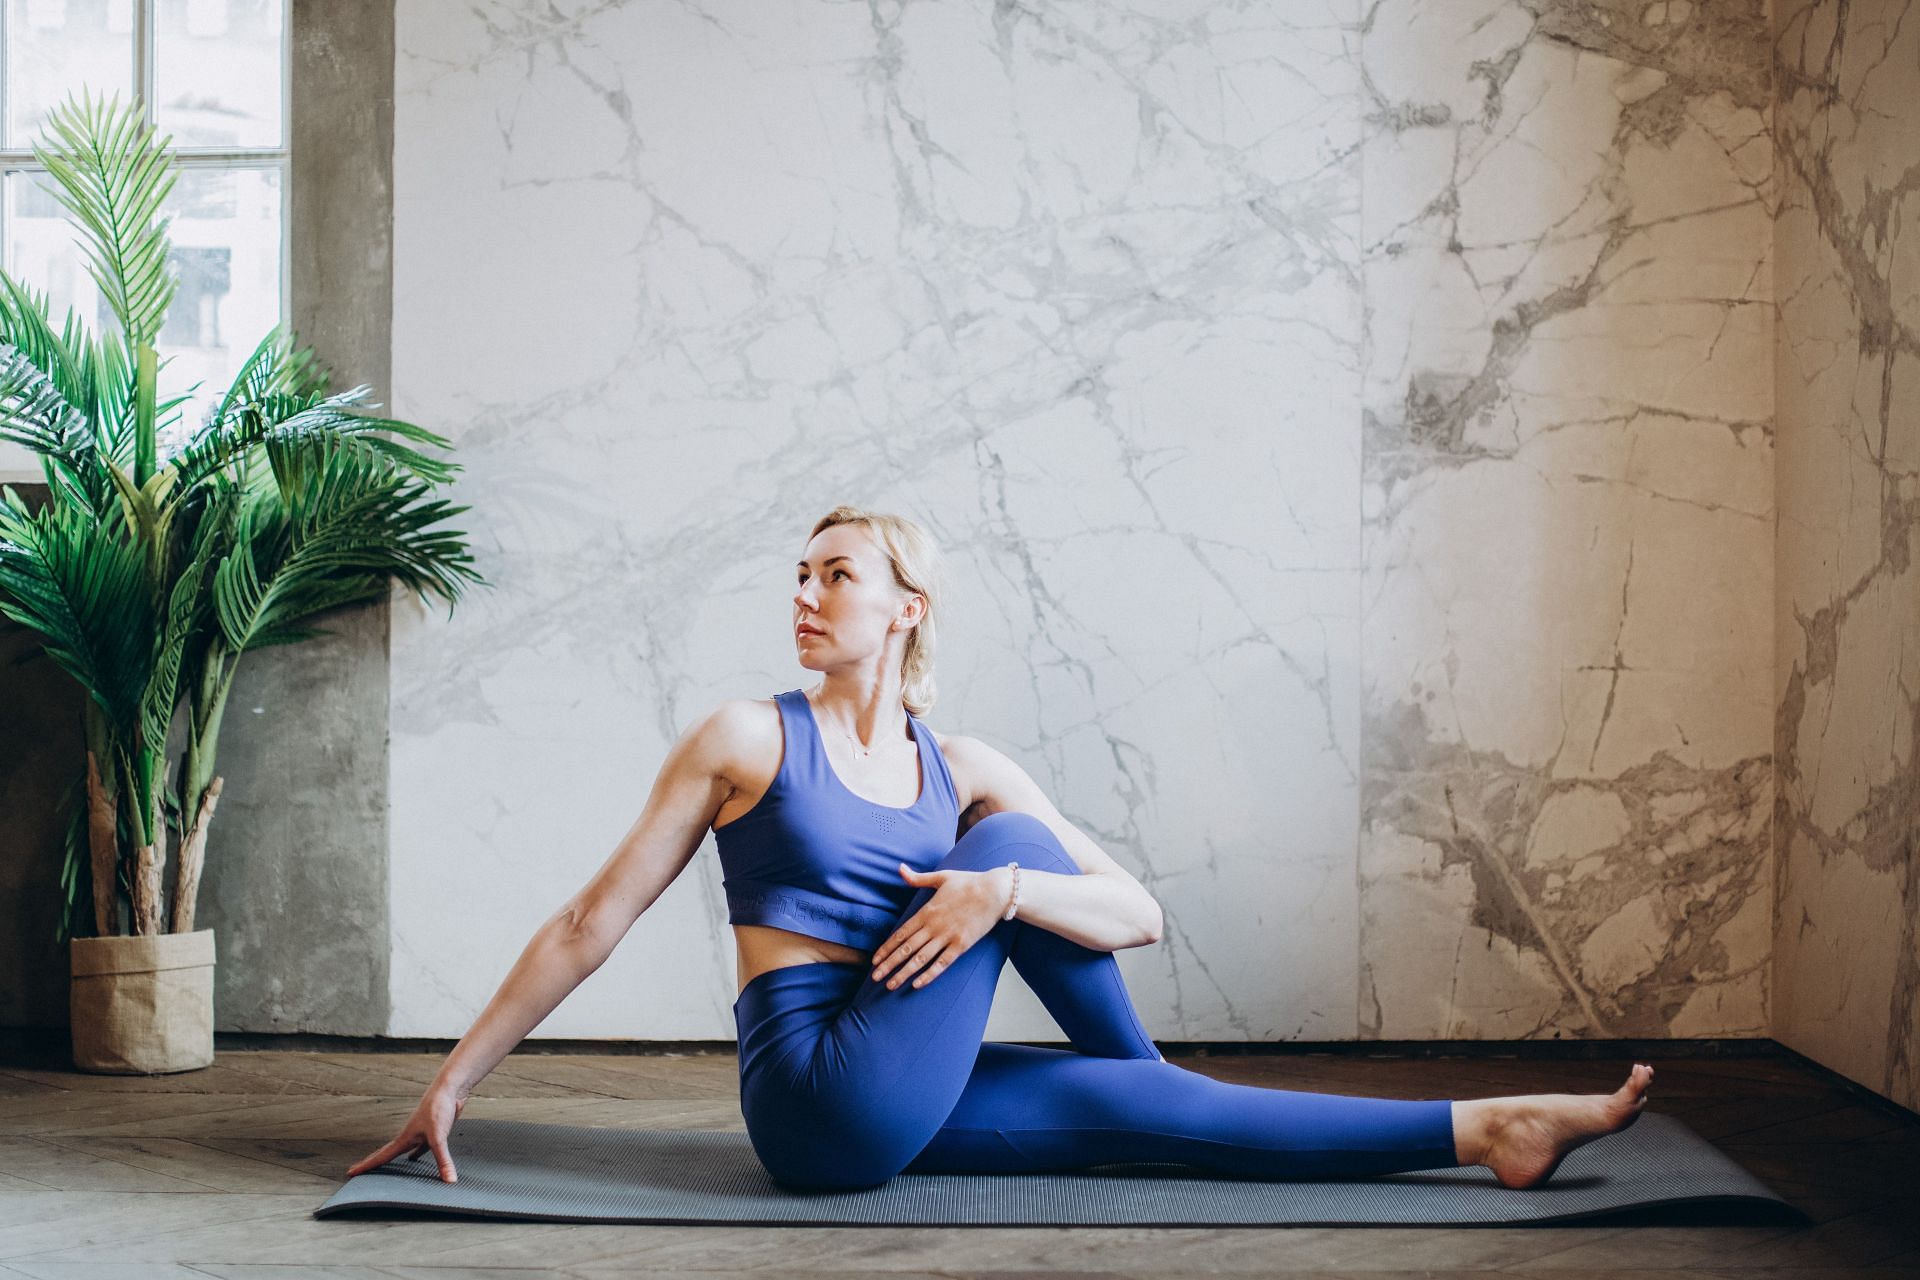 Channeling inner strength with guidance from Sugar Ridge's yoga teacher in  the Virabhadrasana III pose – mastering balance, grace, and… | Instagram